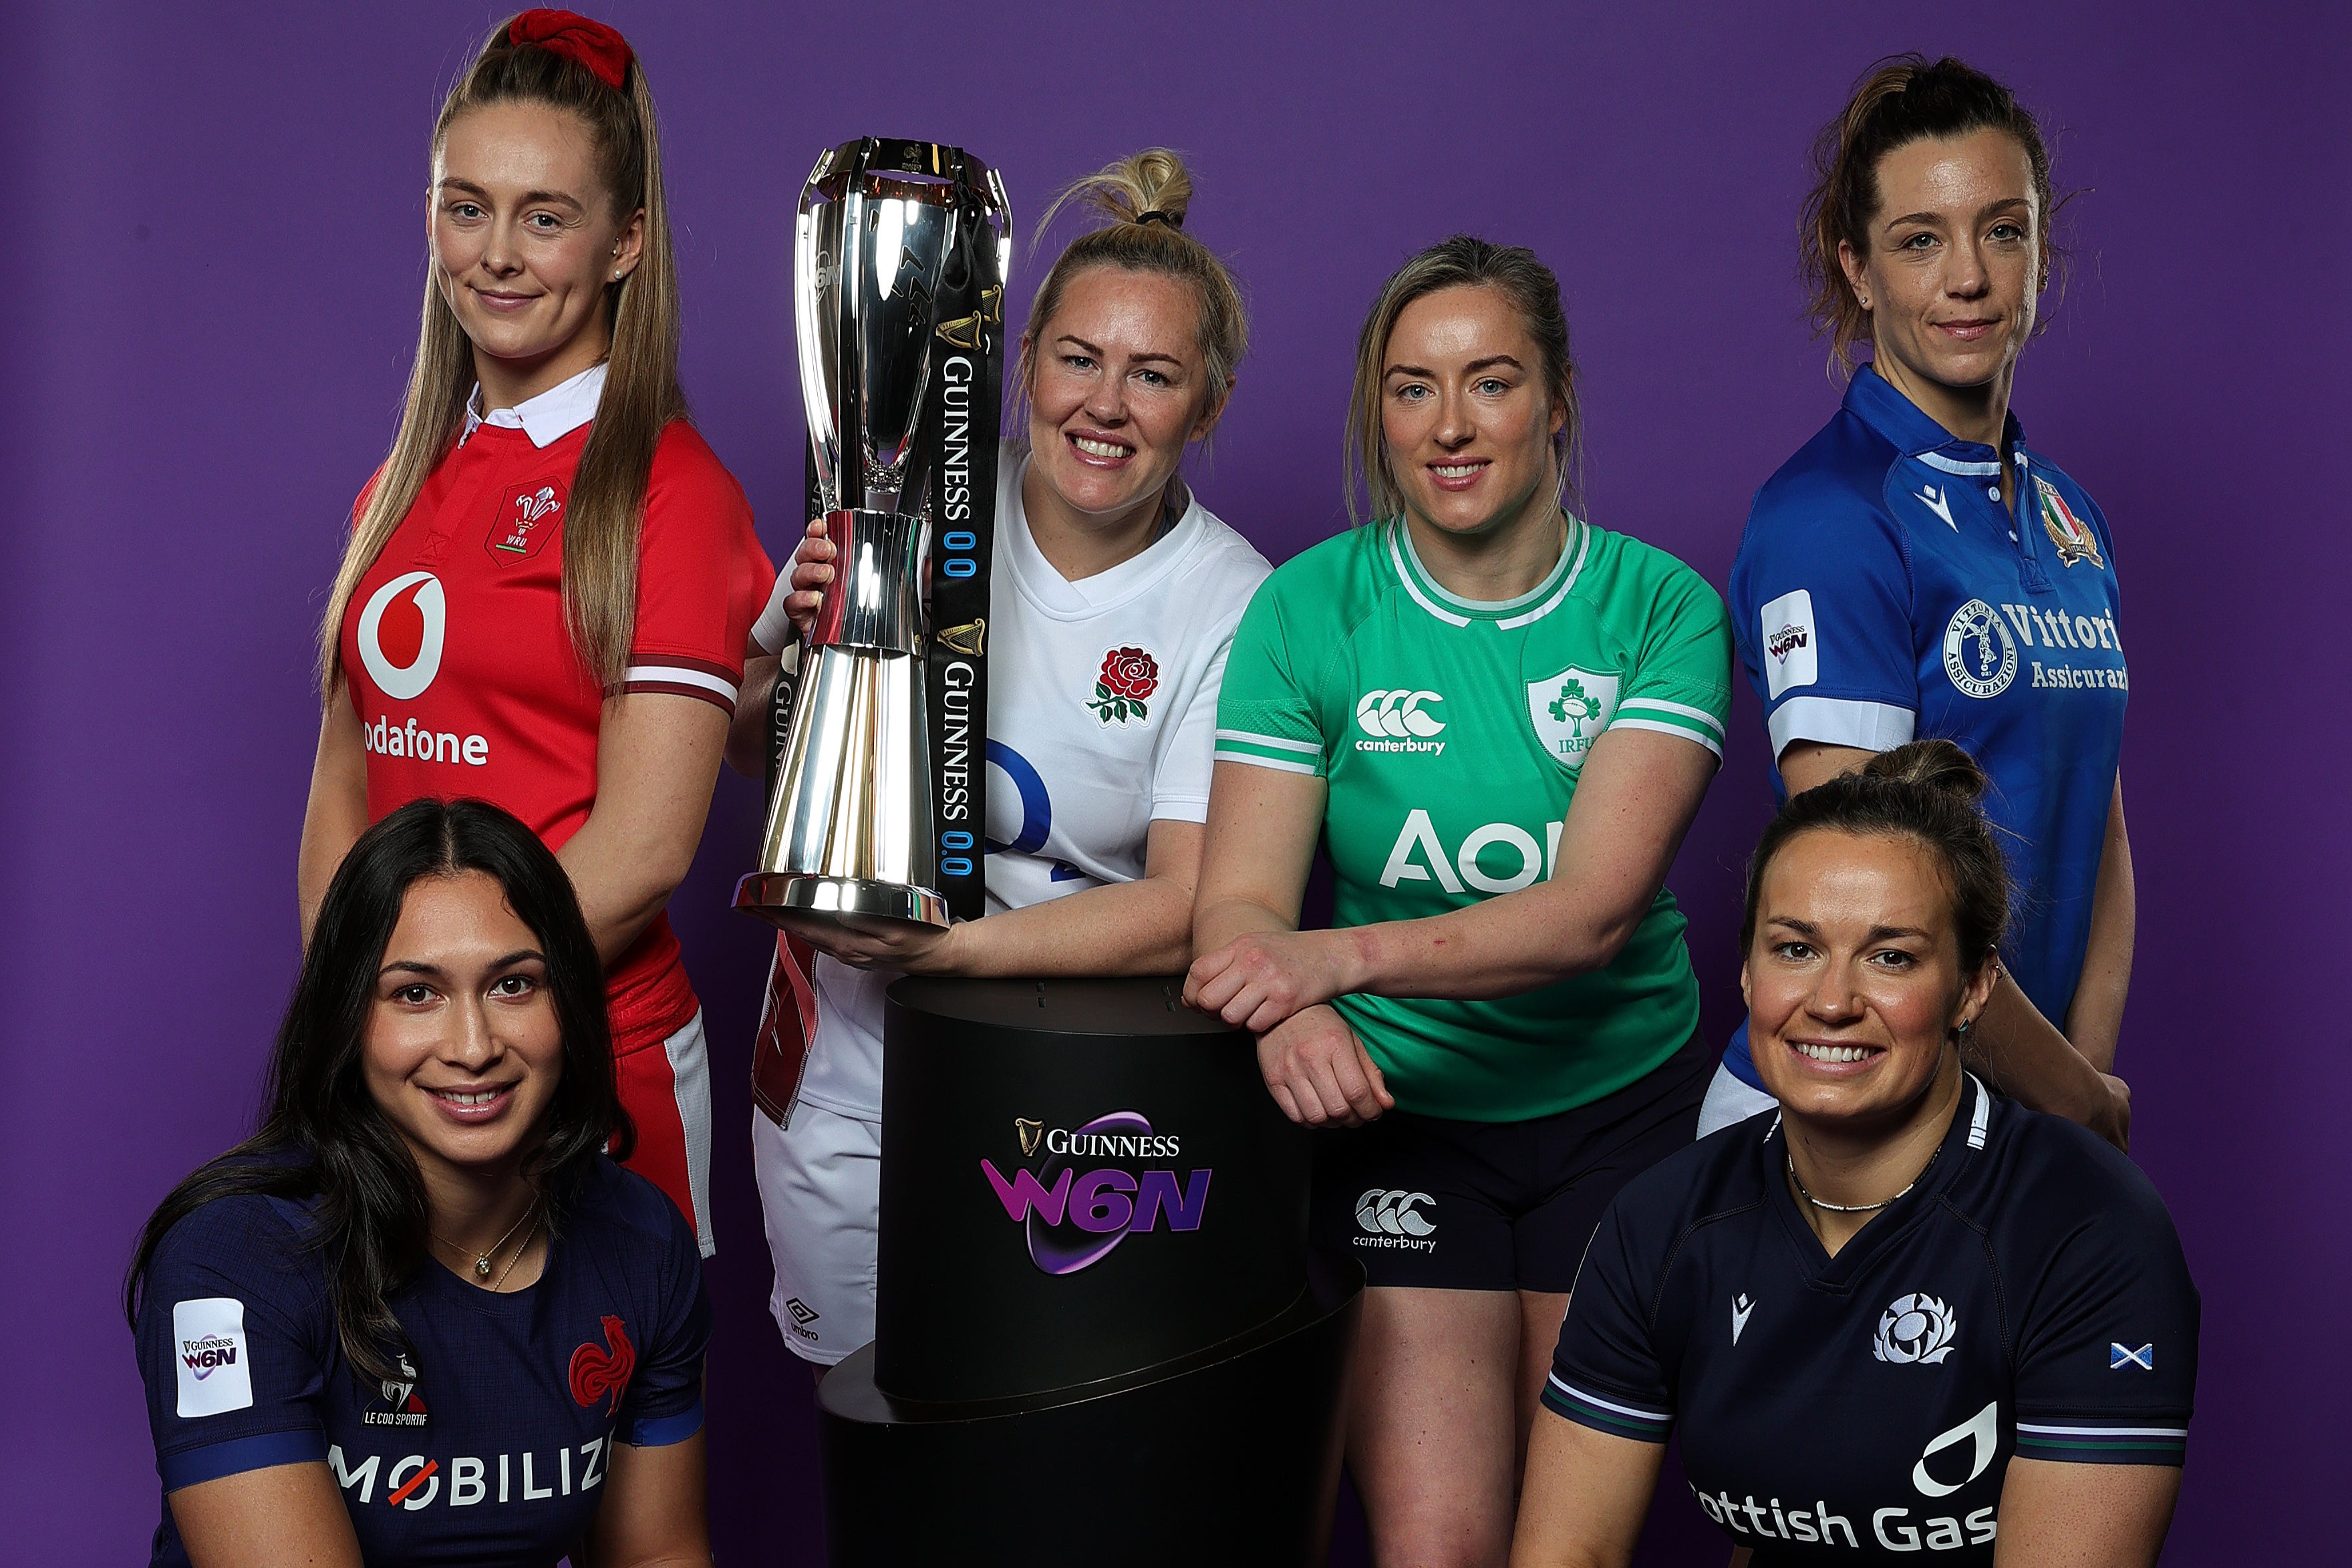 England and France have dominated the Women’s Six Nations, which kicks-off next weekend